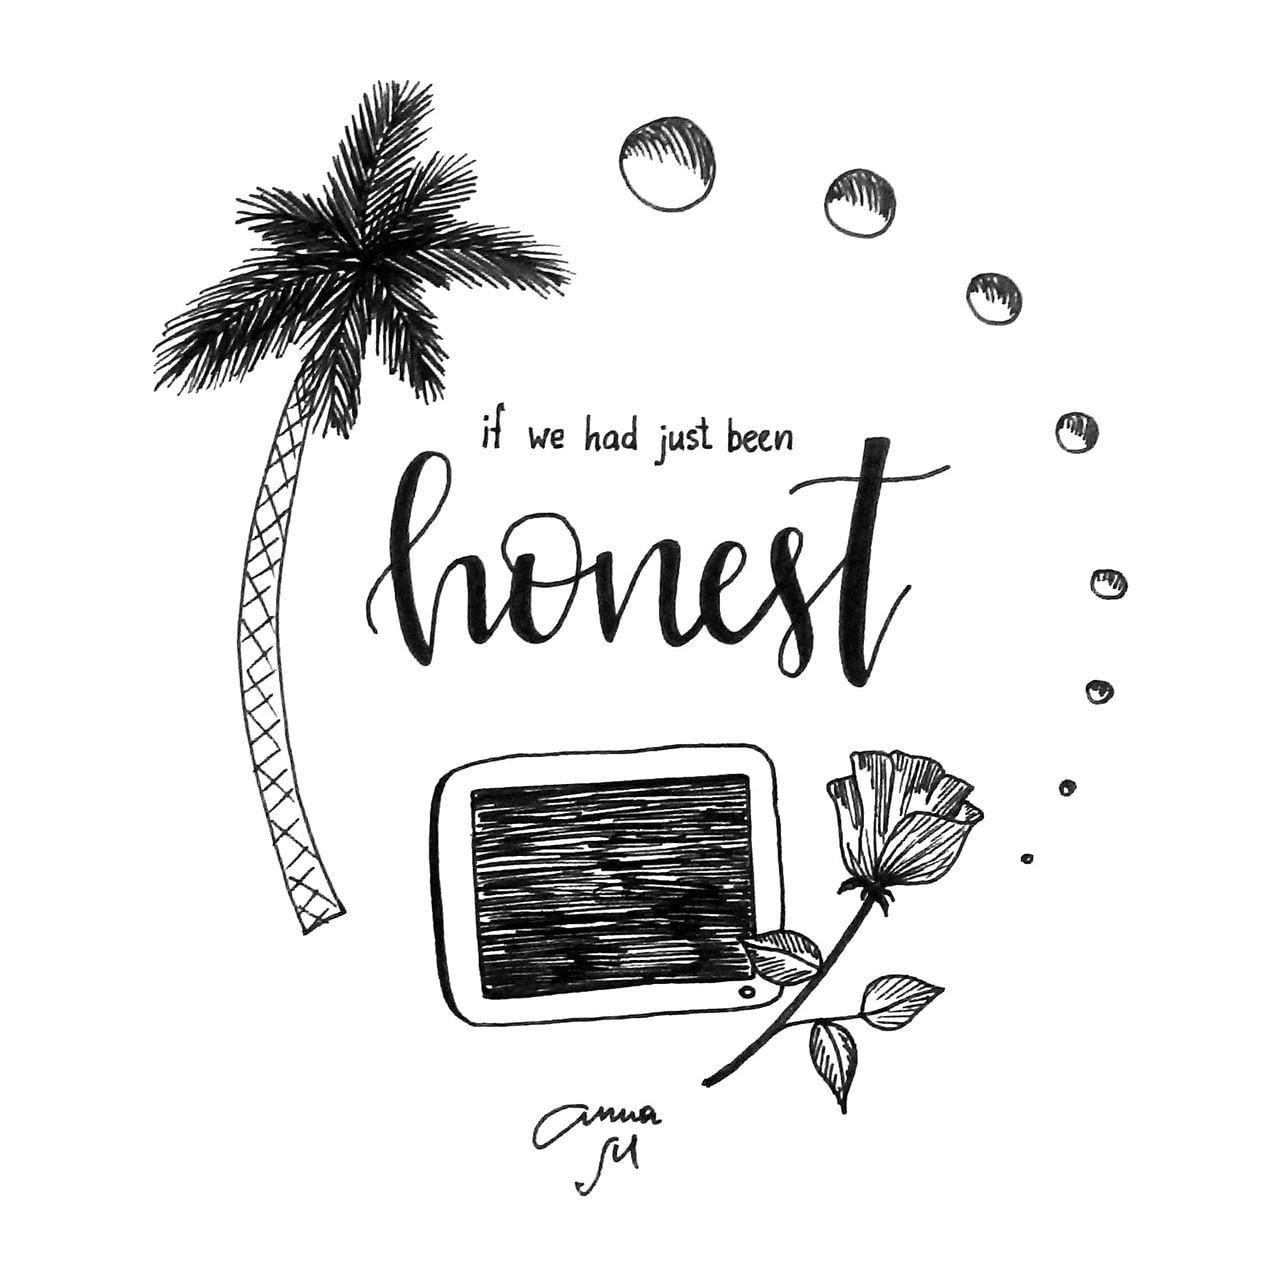 Honest by Bazzi discovered